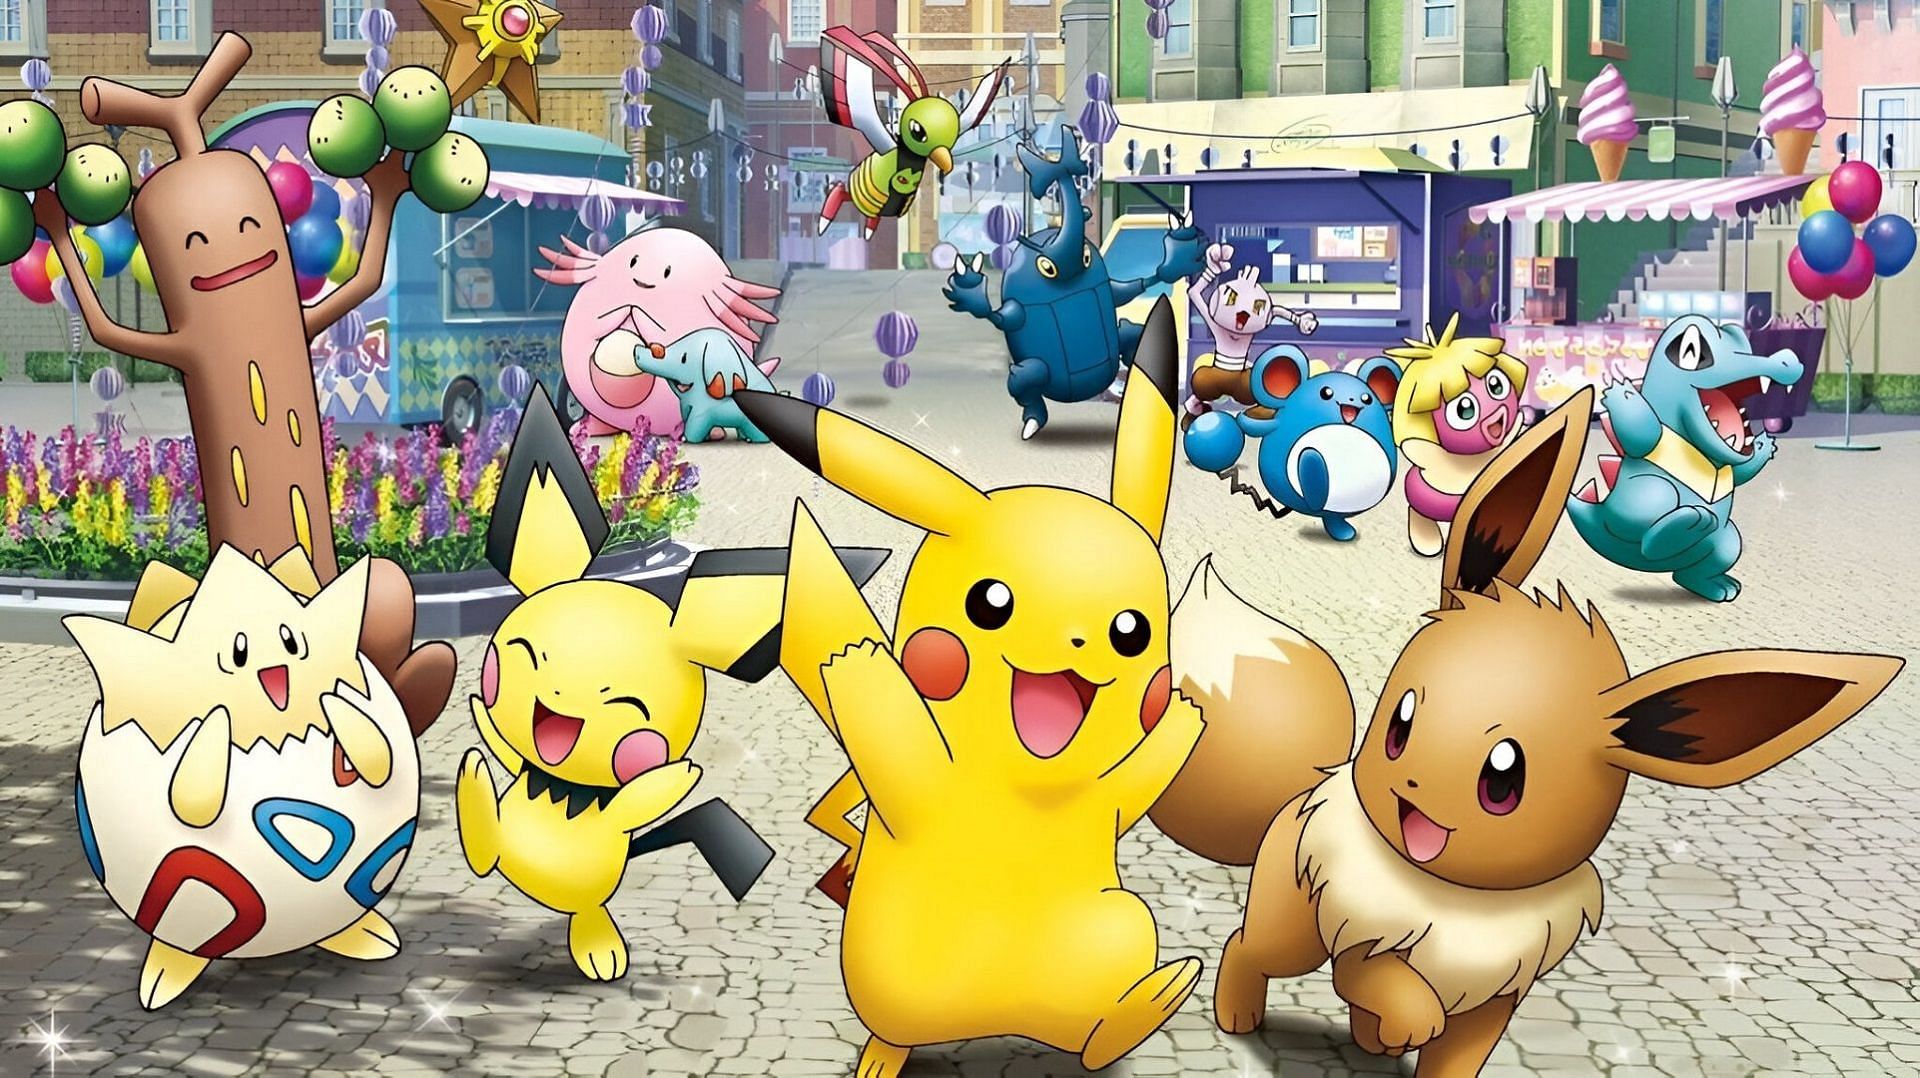 Pikachu and friends make their way through a city street in official Pokemon artwork.